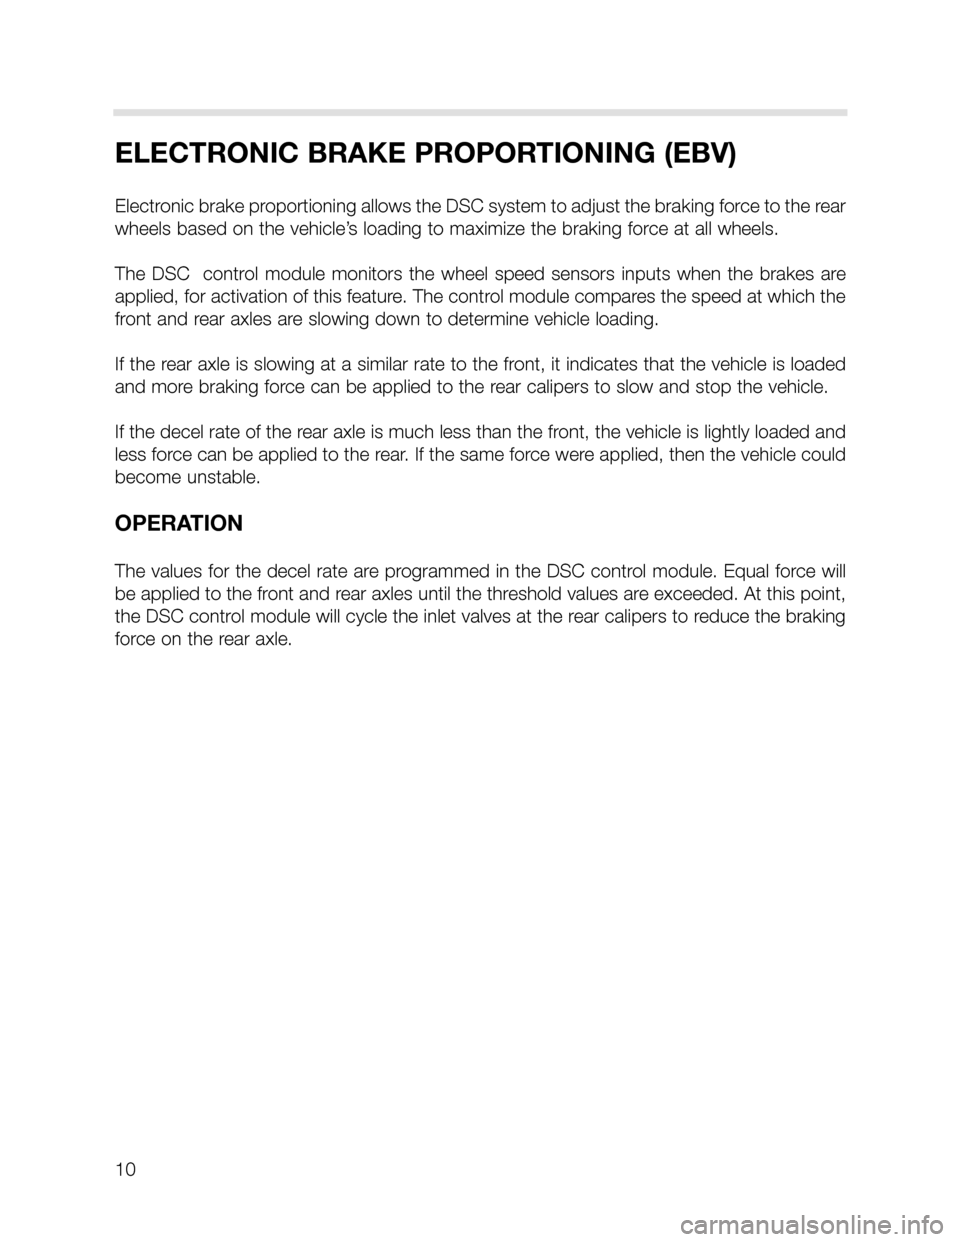 BMW X5 2001 E53 DSC System Workshop Manual 10
ELECTRONIC BRAKE PROPORTIONING (EBV)
Electronic brake proportioning allows the DSC system to adjust the braking force to the rear
wheels based on the vehicle’s loading to maximize the braking for